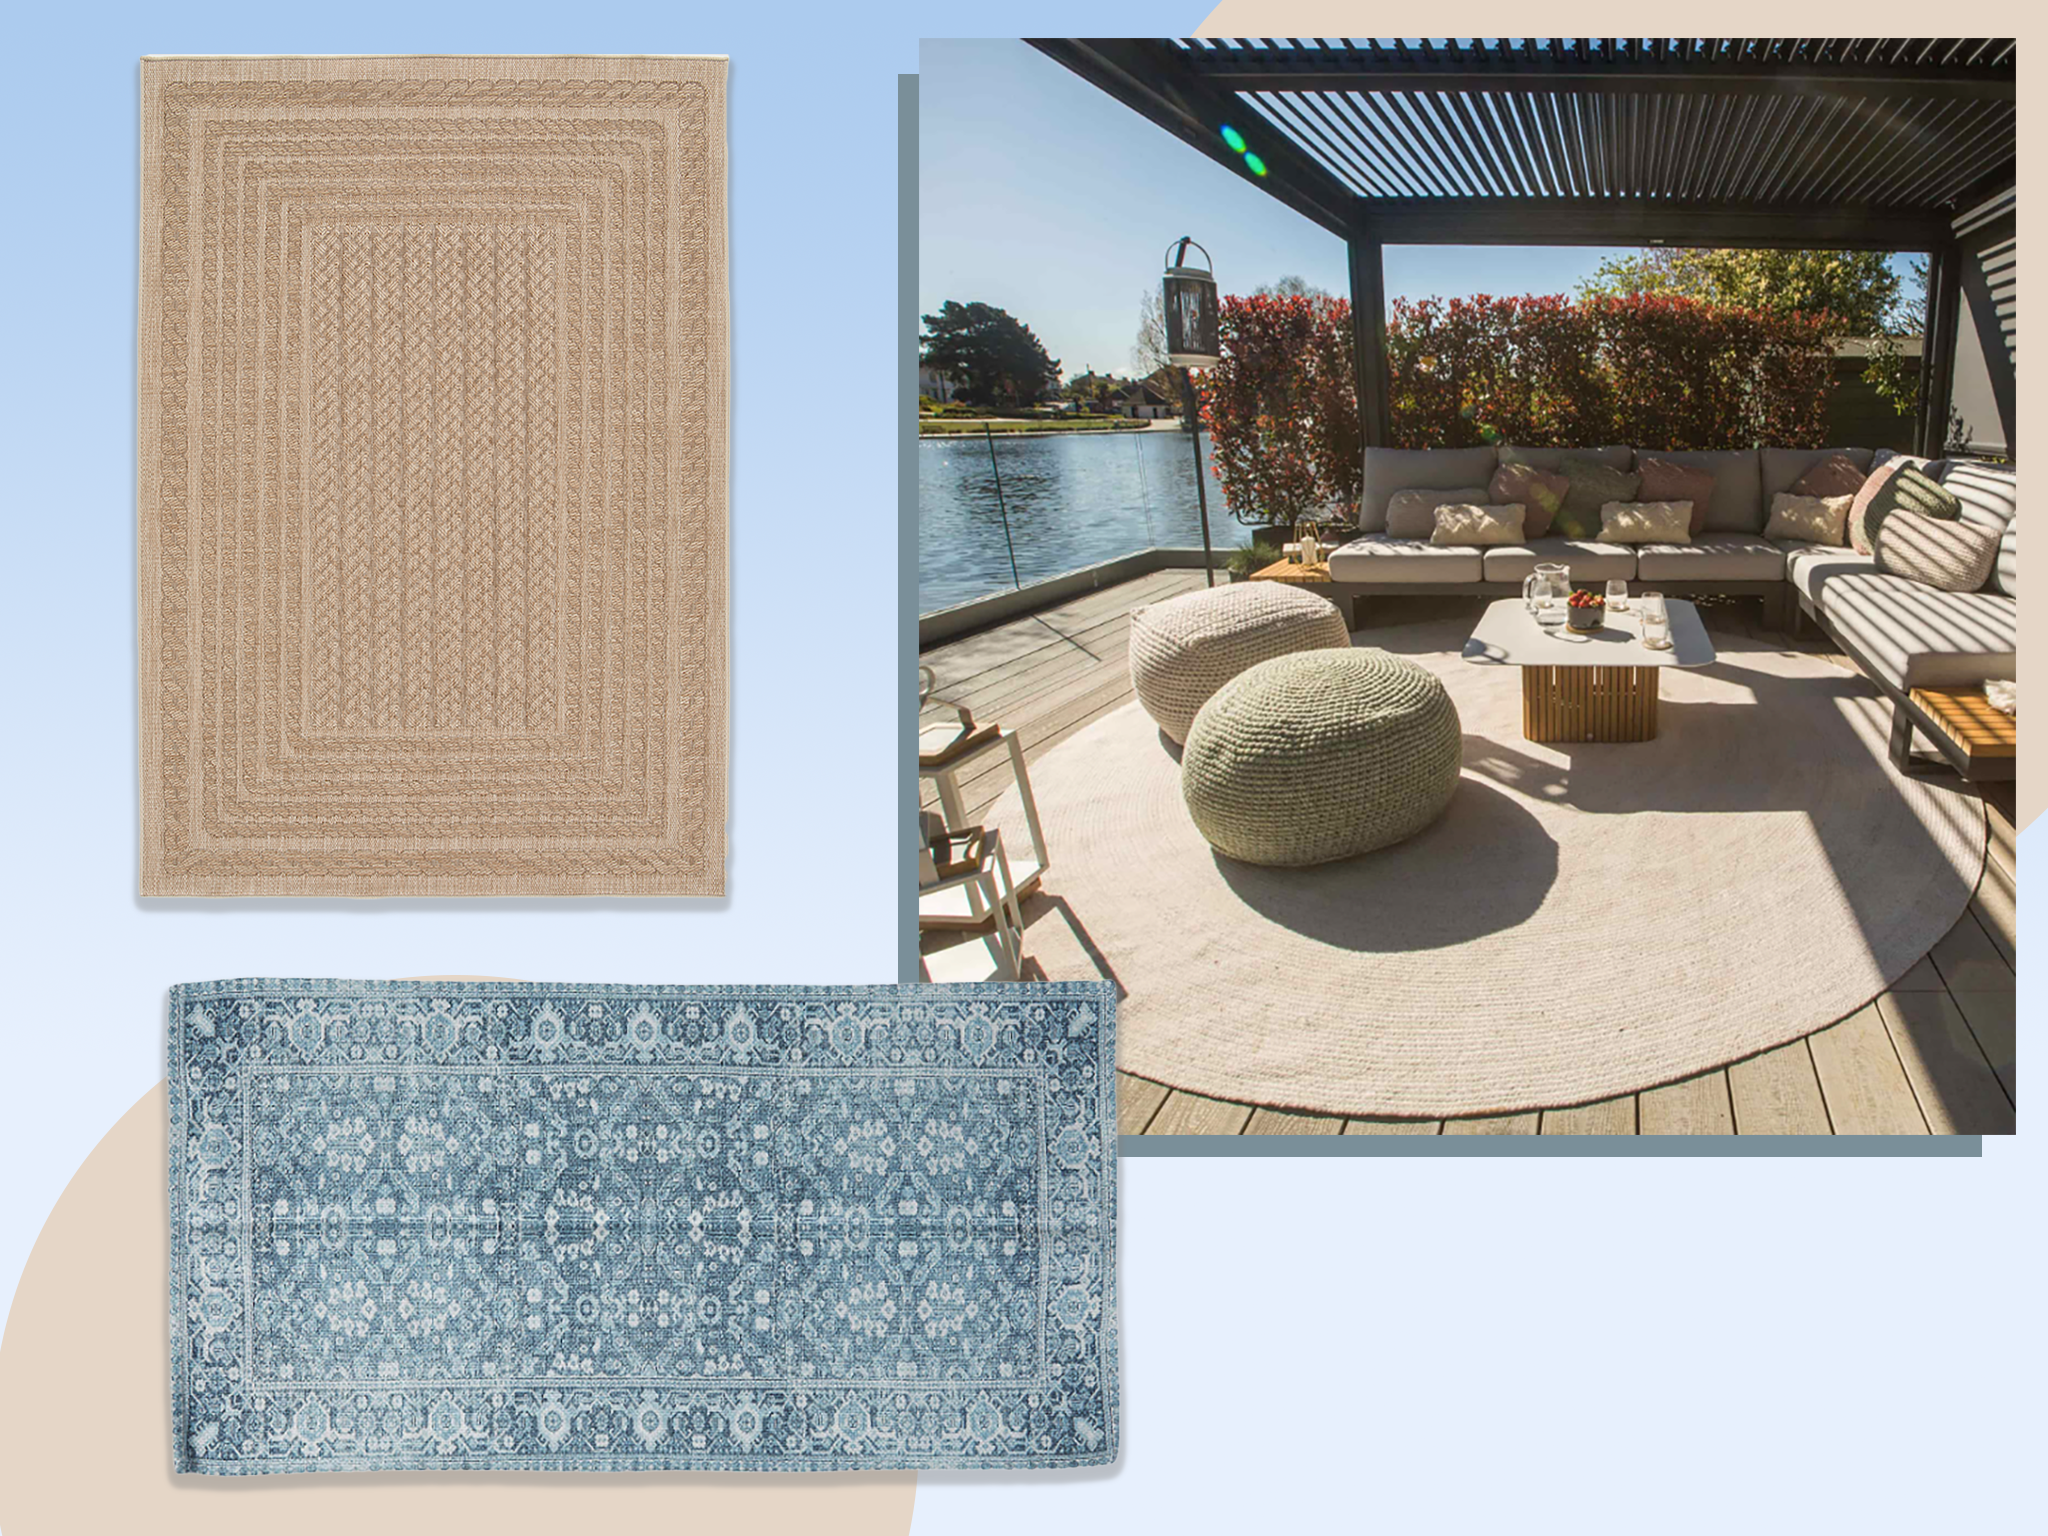 https://static.independent.co.uk/2023/06/09/14/best%20outdoor%20rugs.png